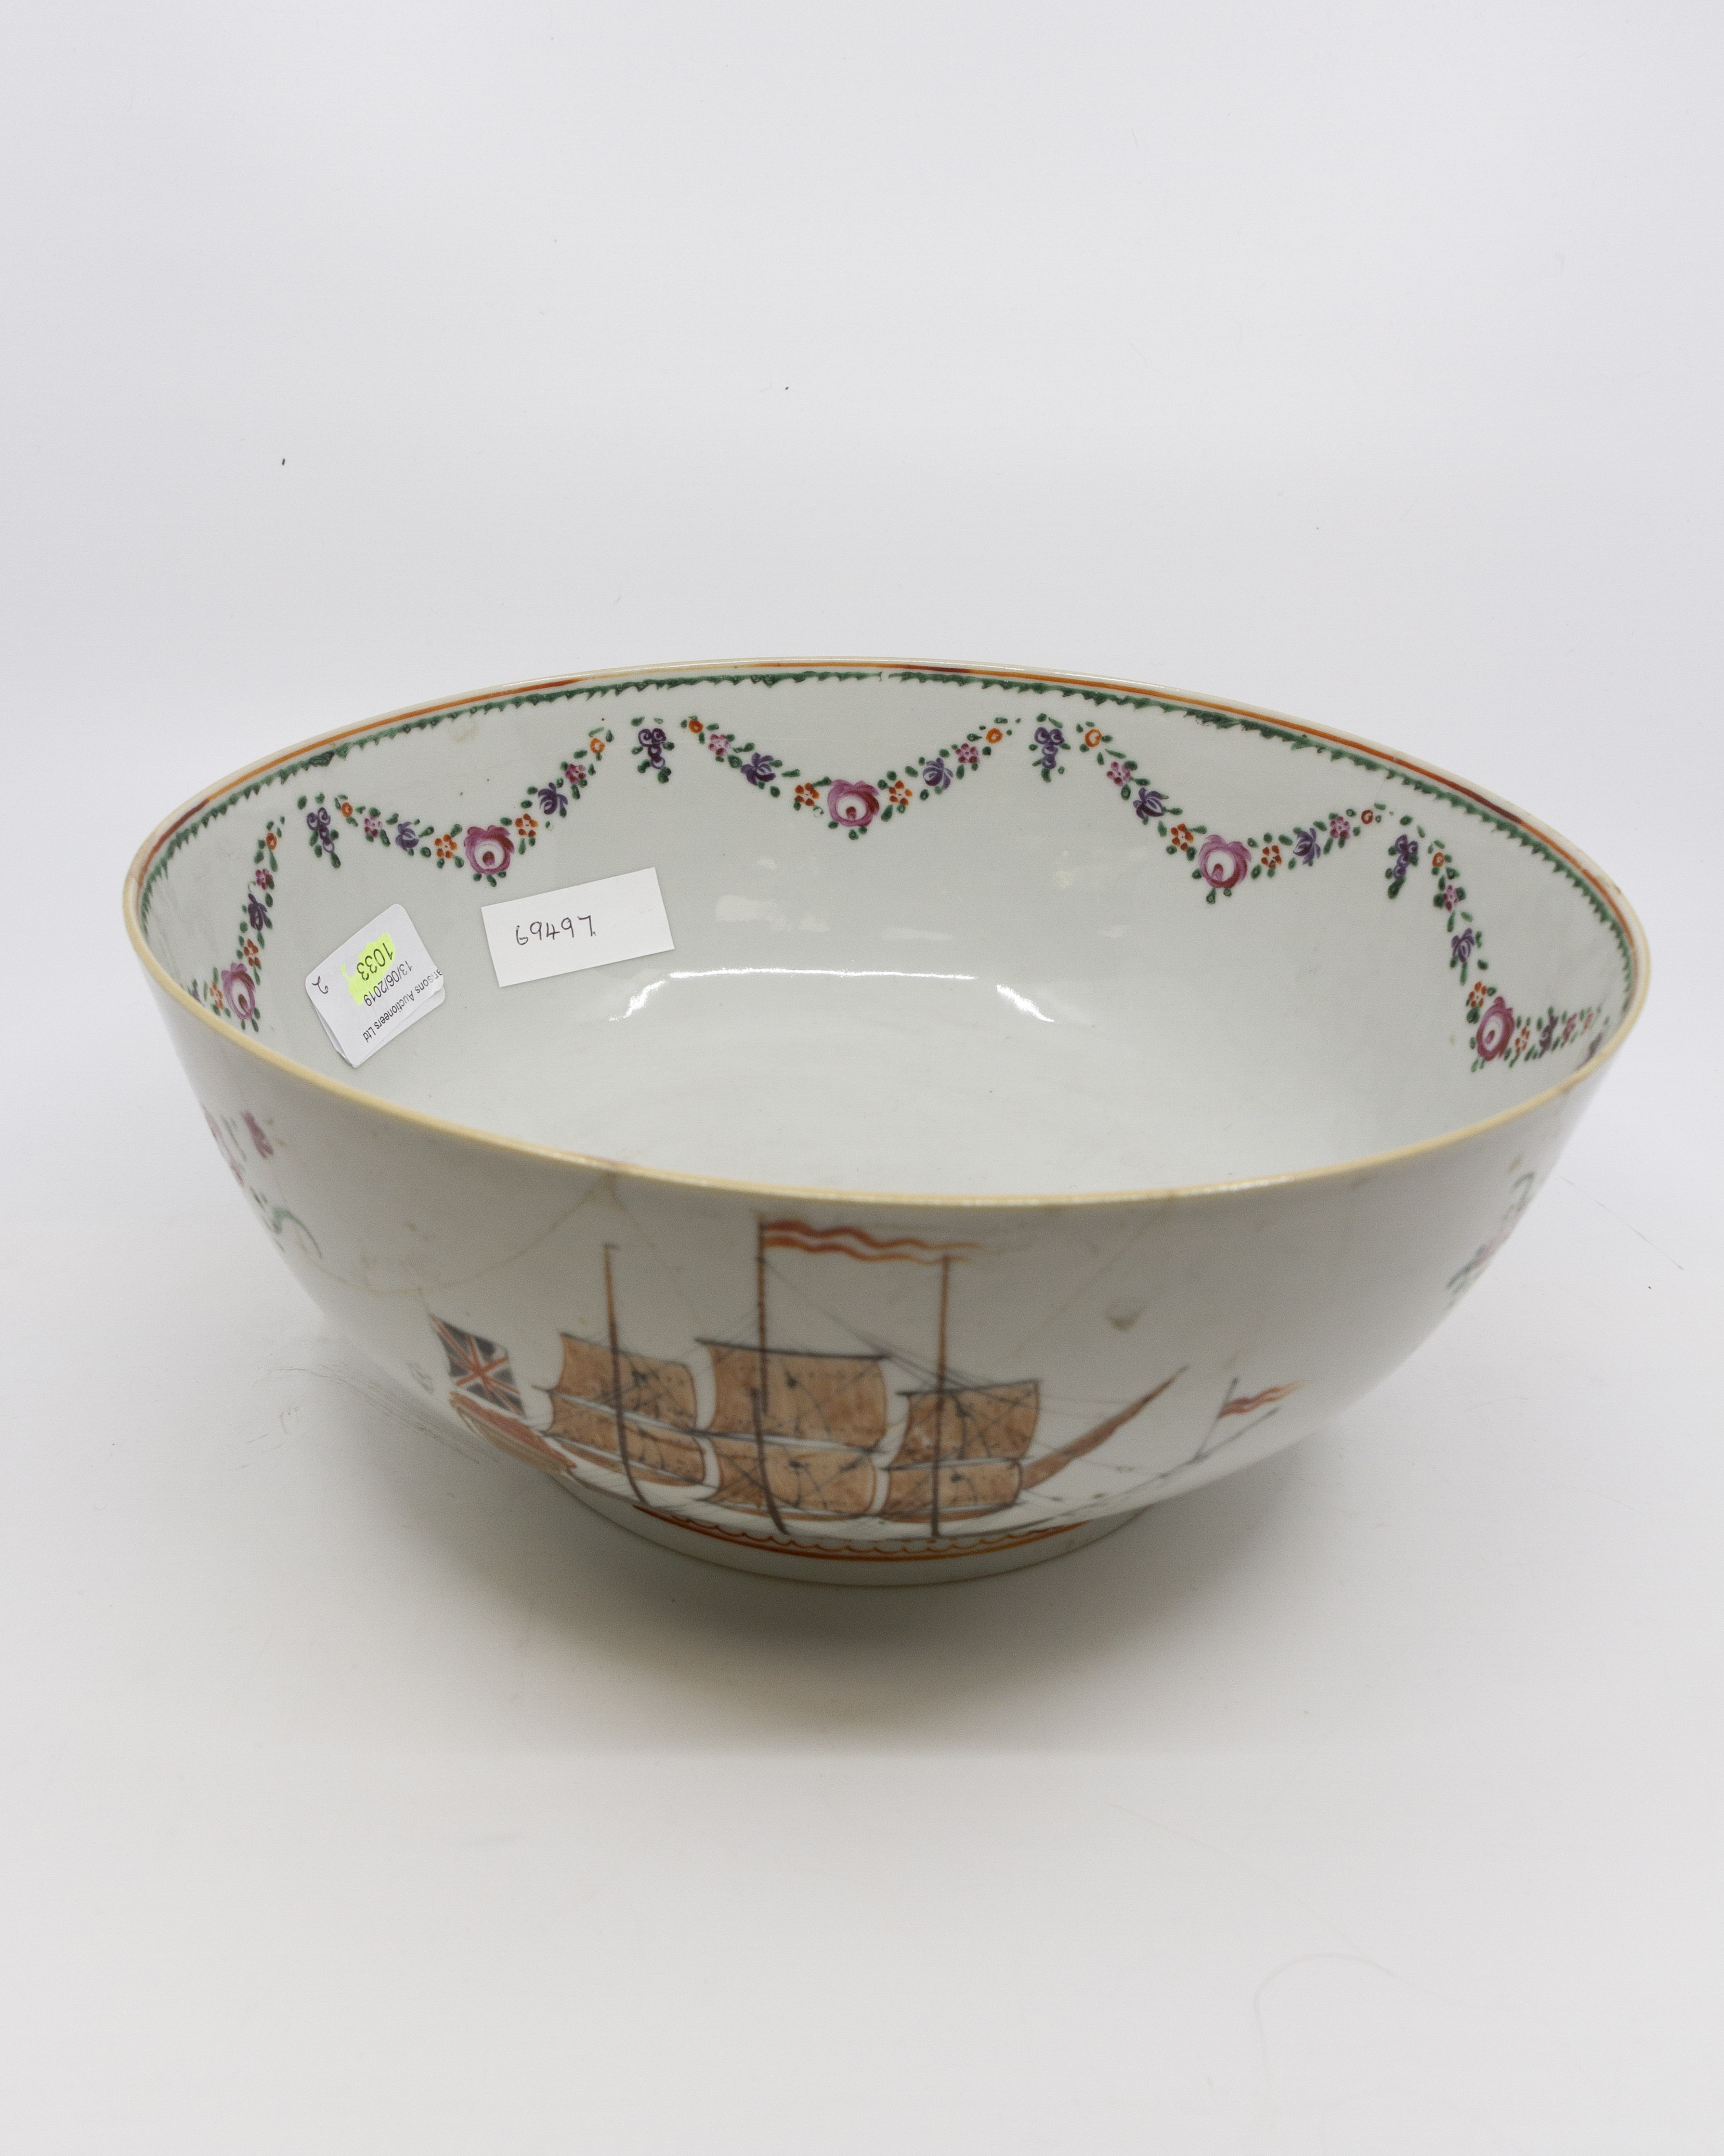 A pair of late 18th Century Chinese export ware Famille rose bowls, circa 1780, - Image 2 of 2